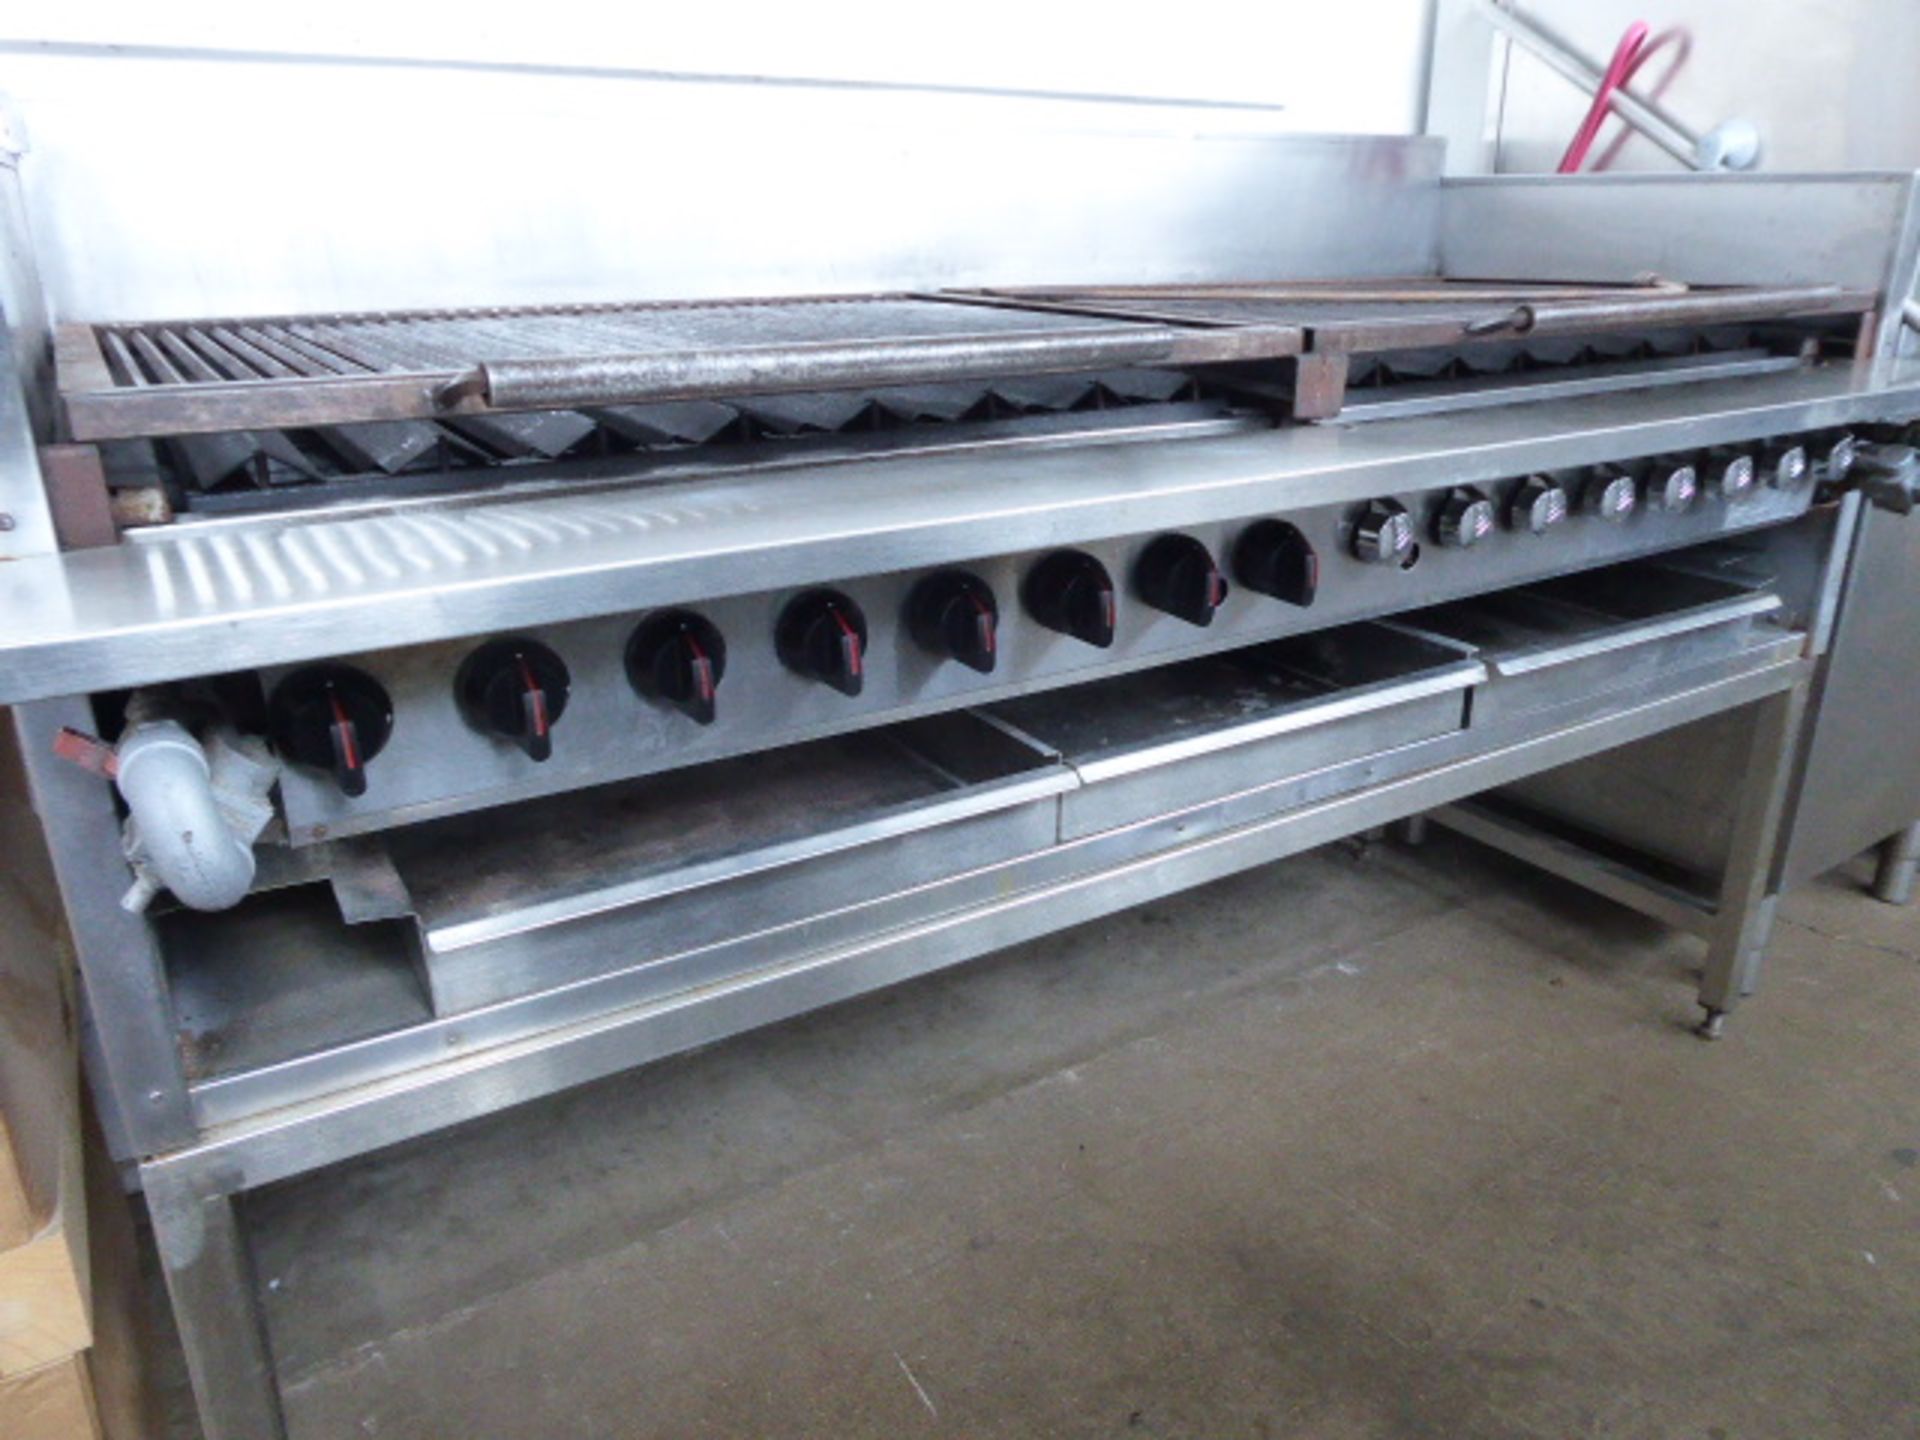 (50) 185cm Magikitch-n inc American style gas char grill with multi burners on custom built table - Image 2 of 2